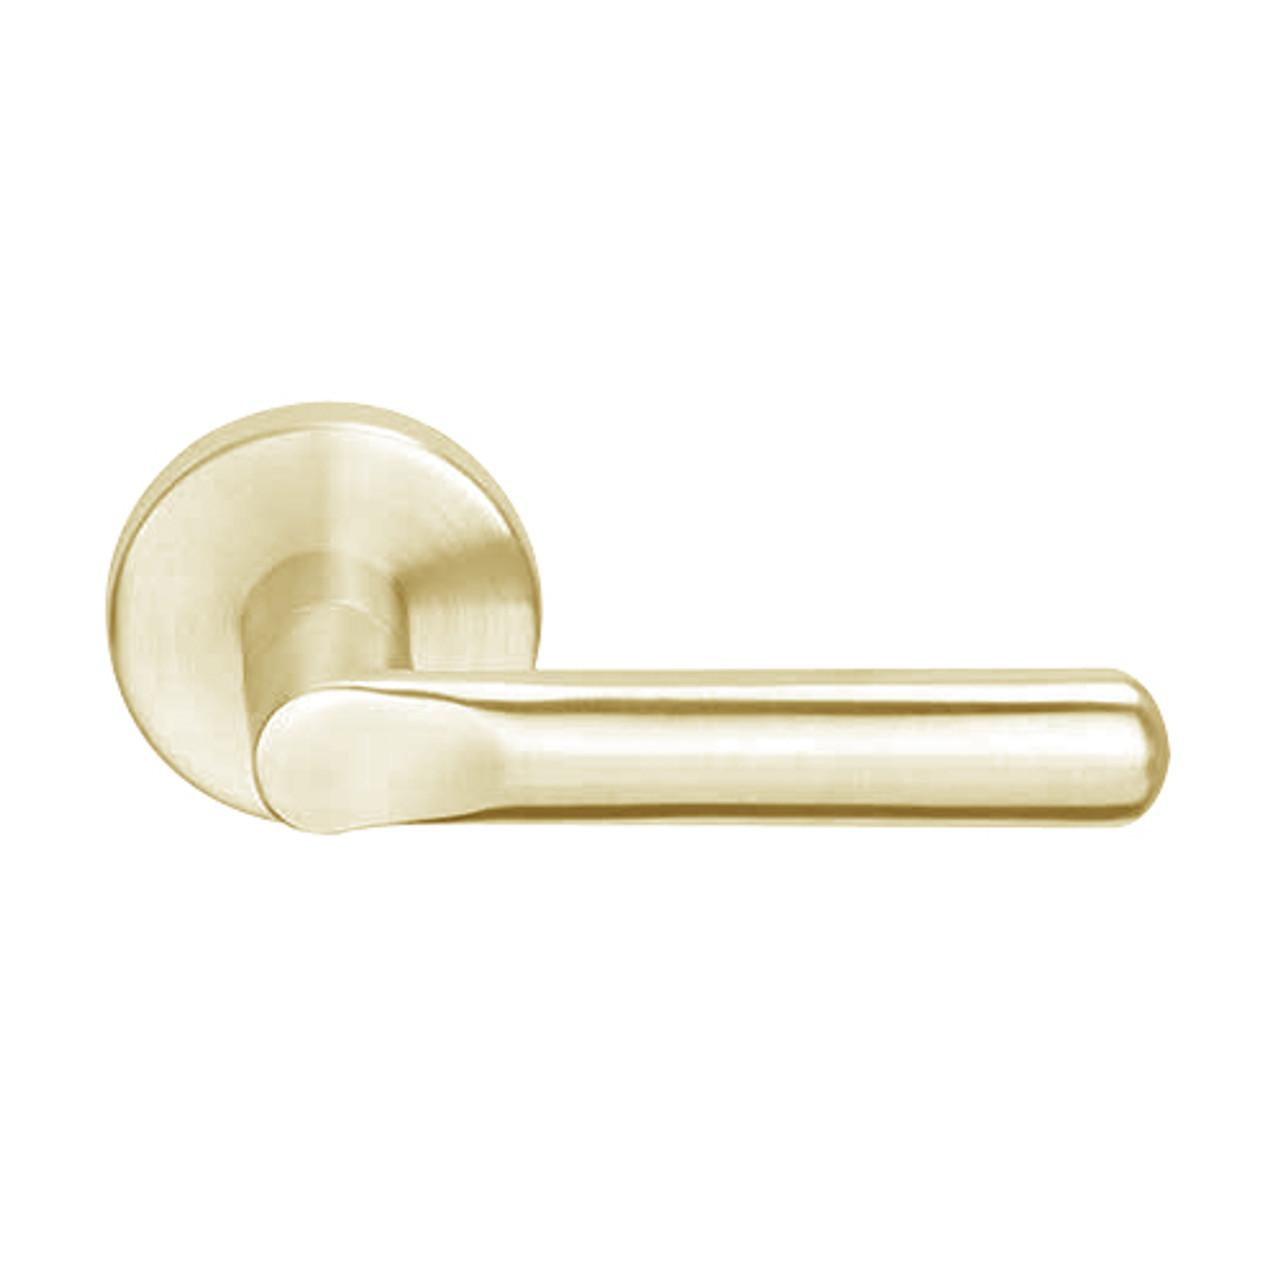 L9080L-18A-606 Schlage L Series Less Cylinder Storeroom Commercial Mortise Lock with 18 Cast Lever Design in Satin Brass